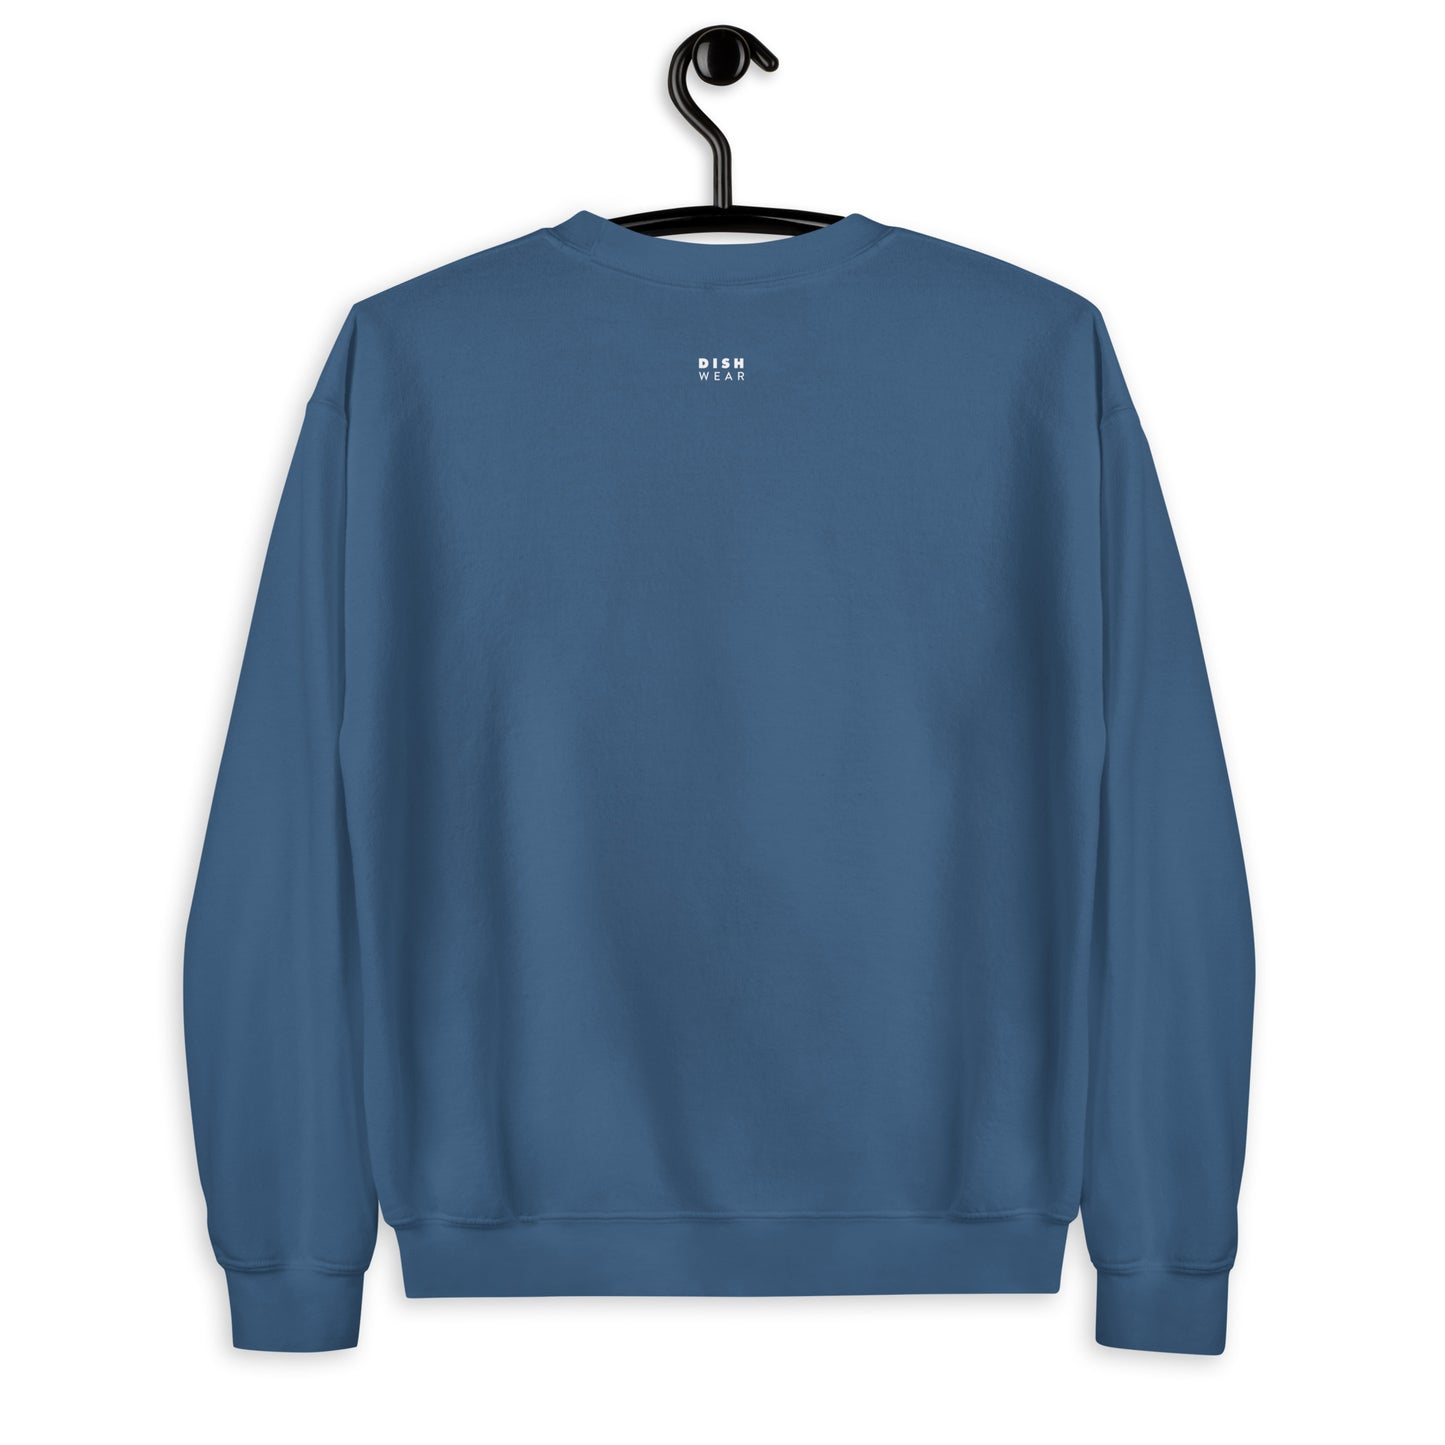 French Fries Sweatshirt - Arched Font